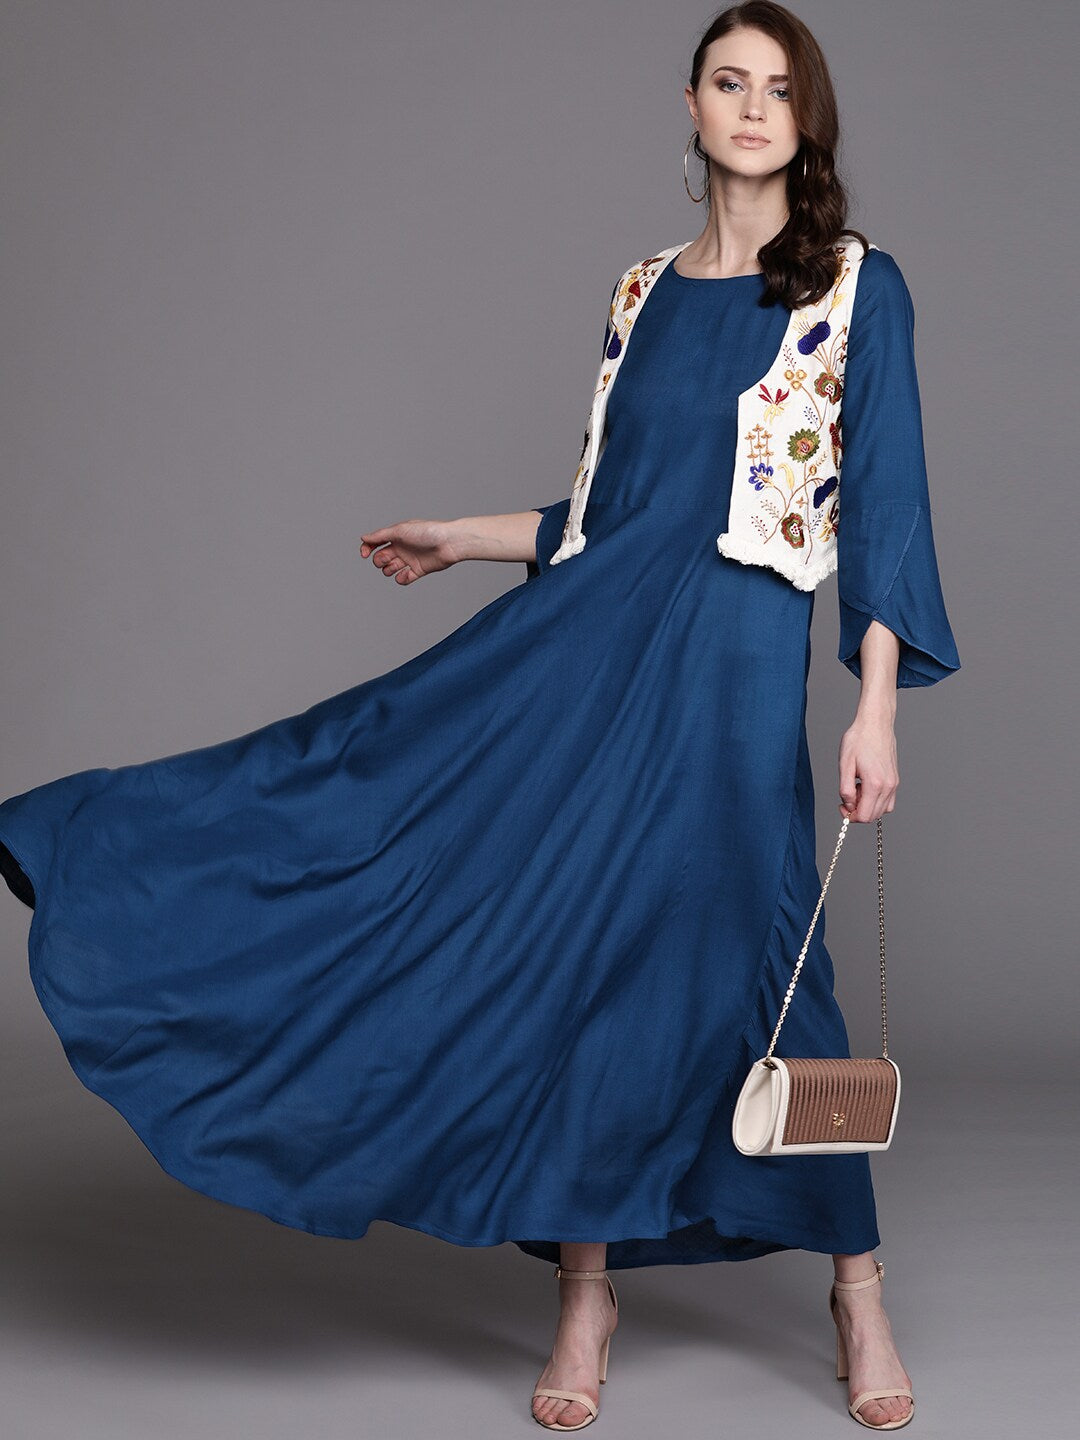 Women's Blue Maxi Gown with Floral Embroidered Jacket - Aks